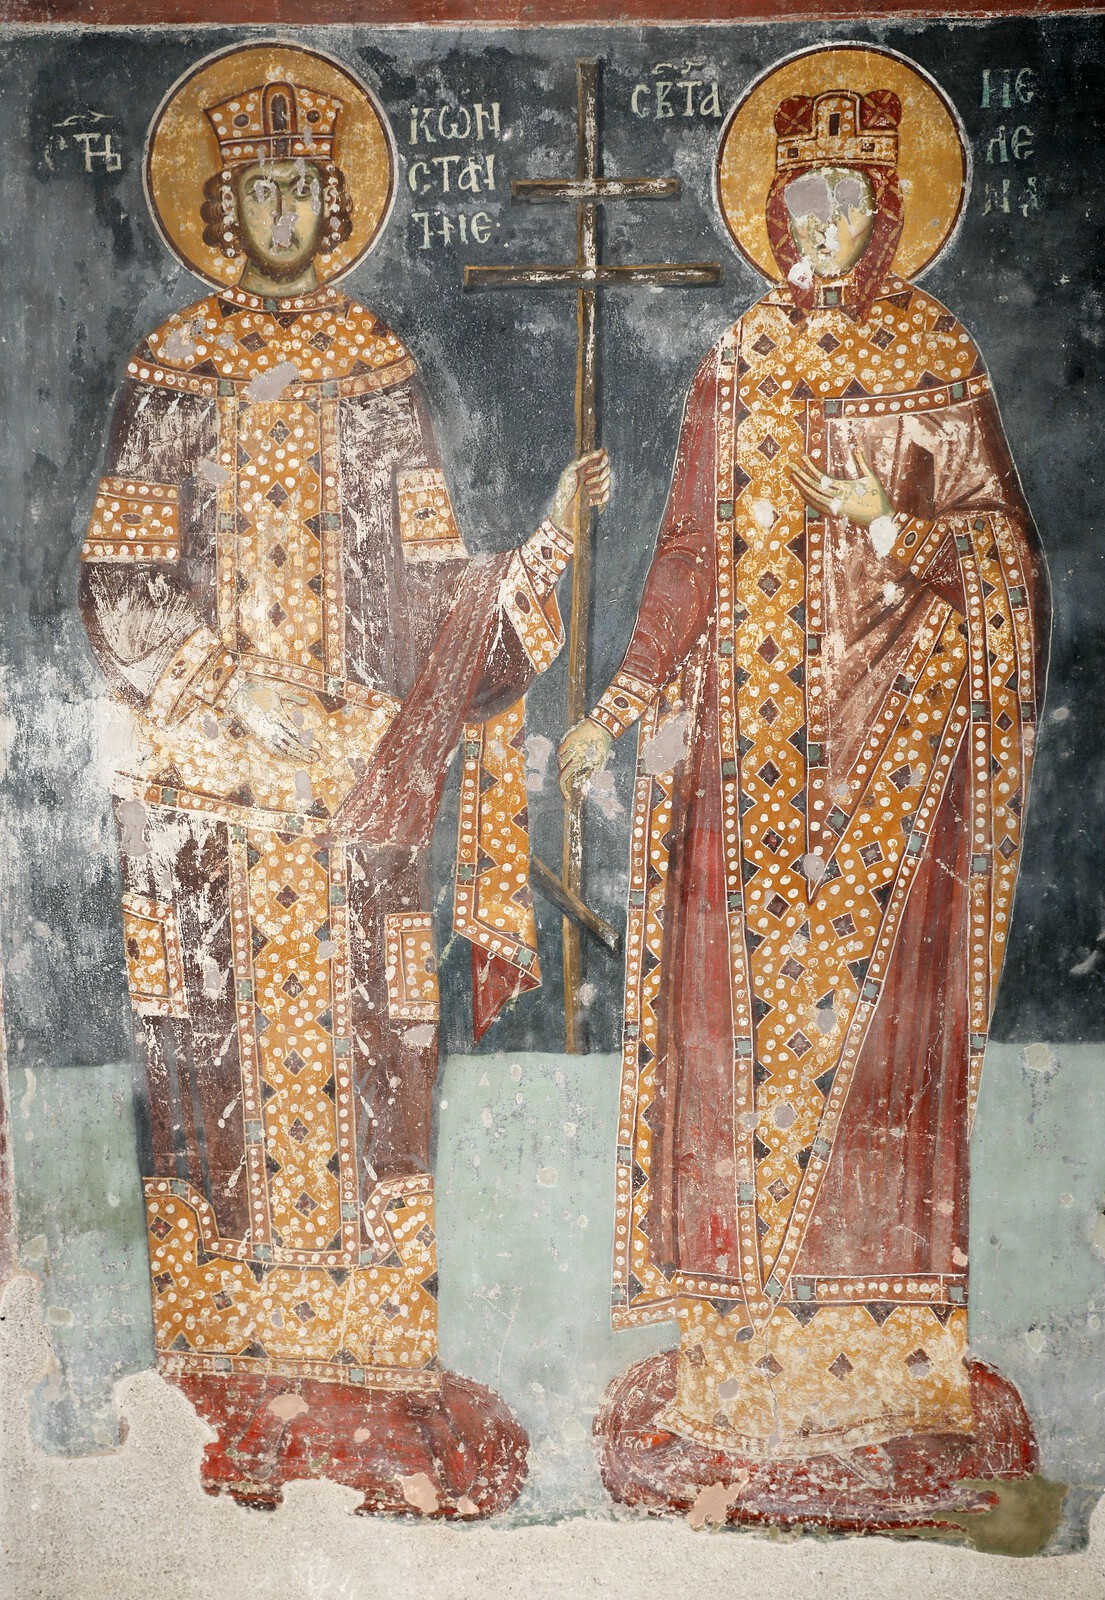 St. Constantine and St. Helena